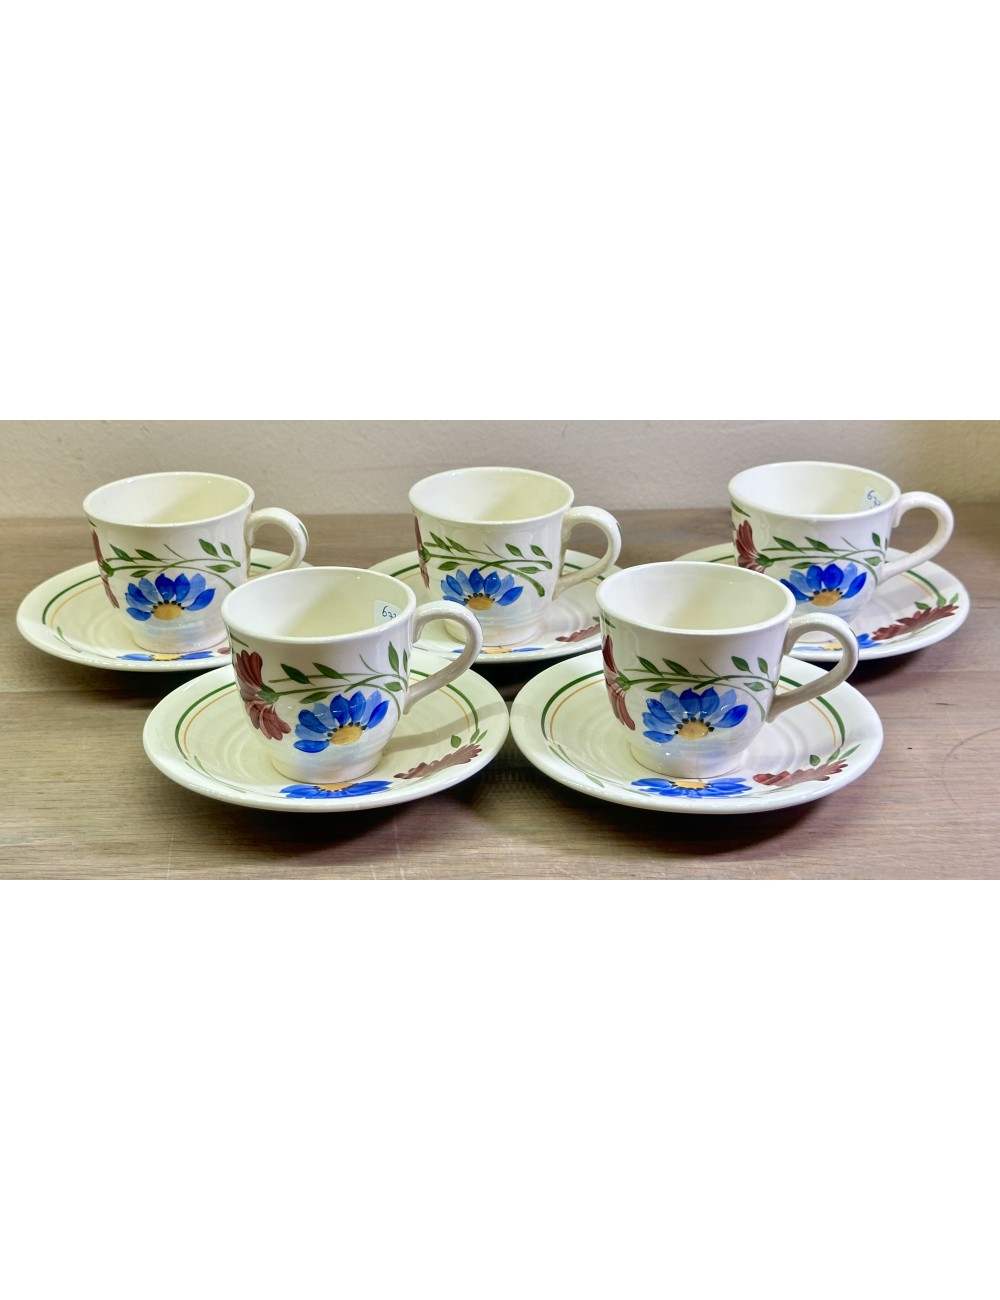 Cup and saucer - mug cups - Boch Frères Keramis (B.F.K) - Boch BOERENBONT-like hand-painted décor